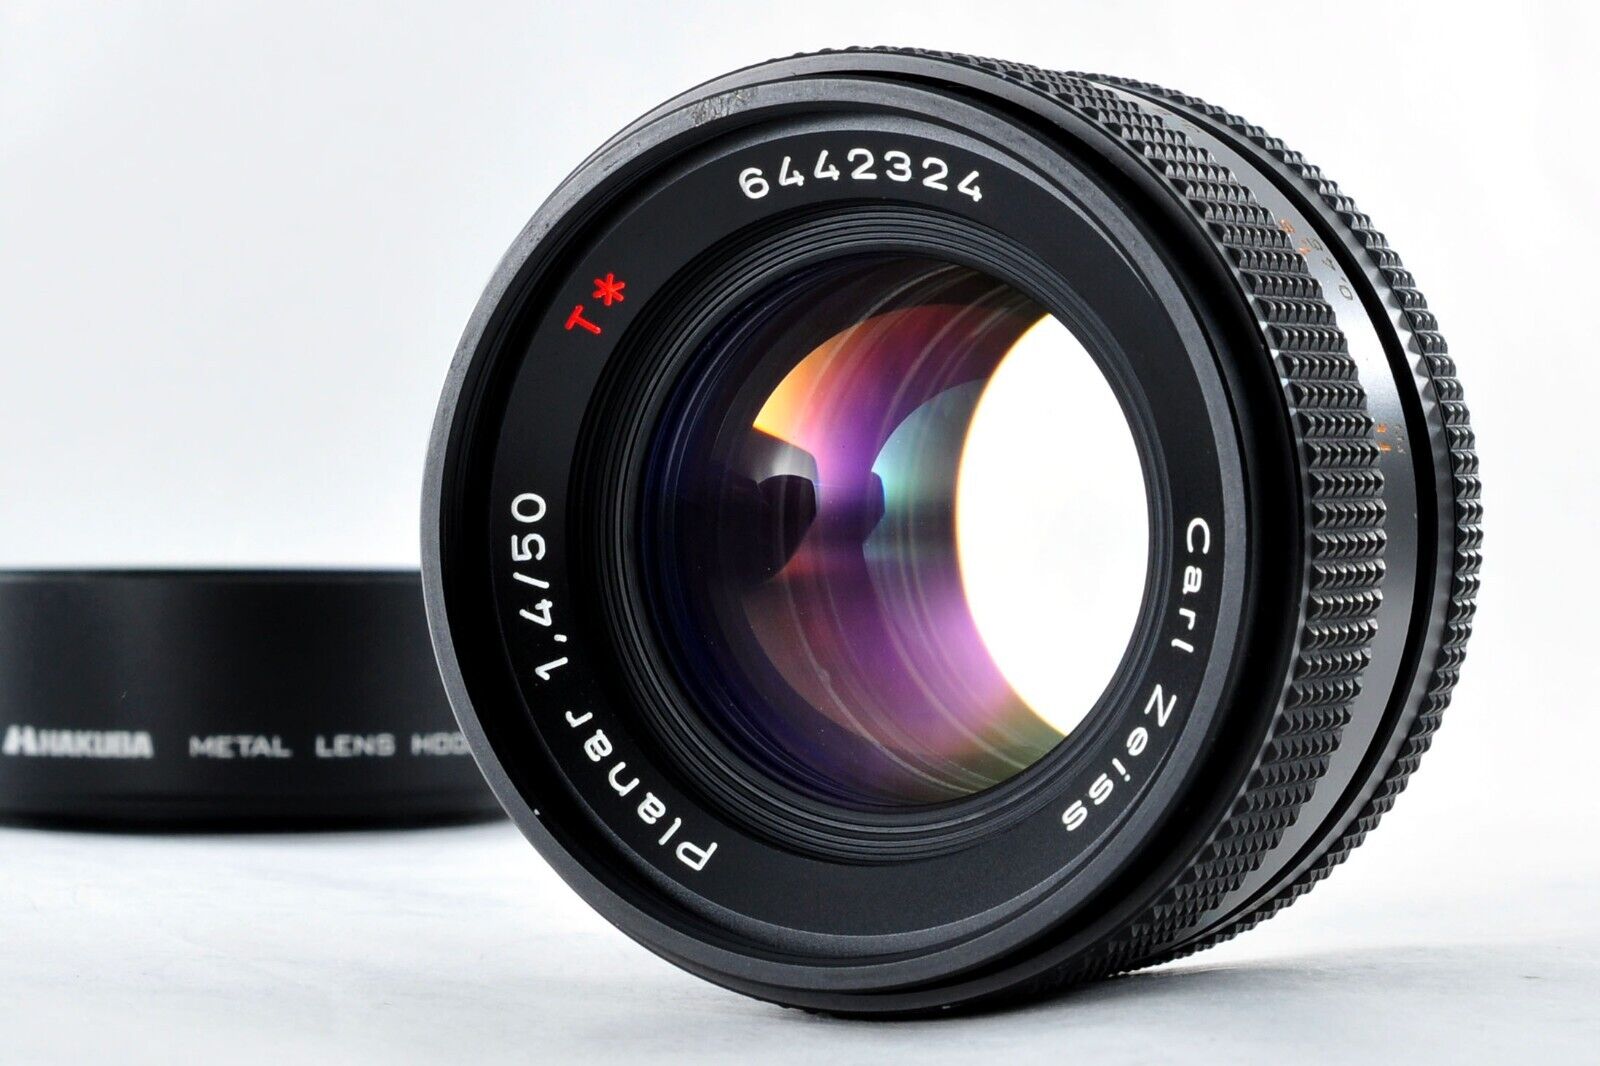 Contax 50mm f/1.4 Carl Zeiss Planar T* Normal Prime C/Y Lens 